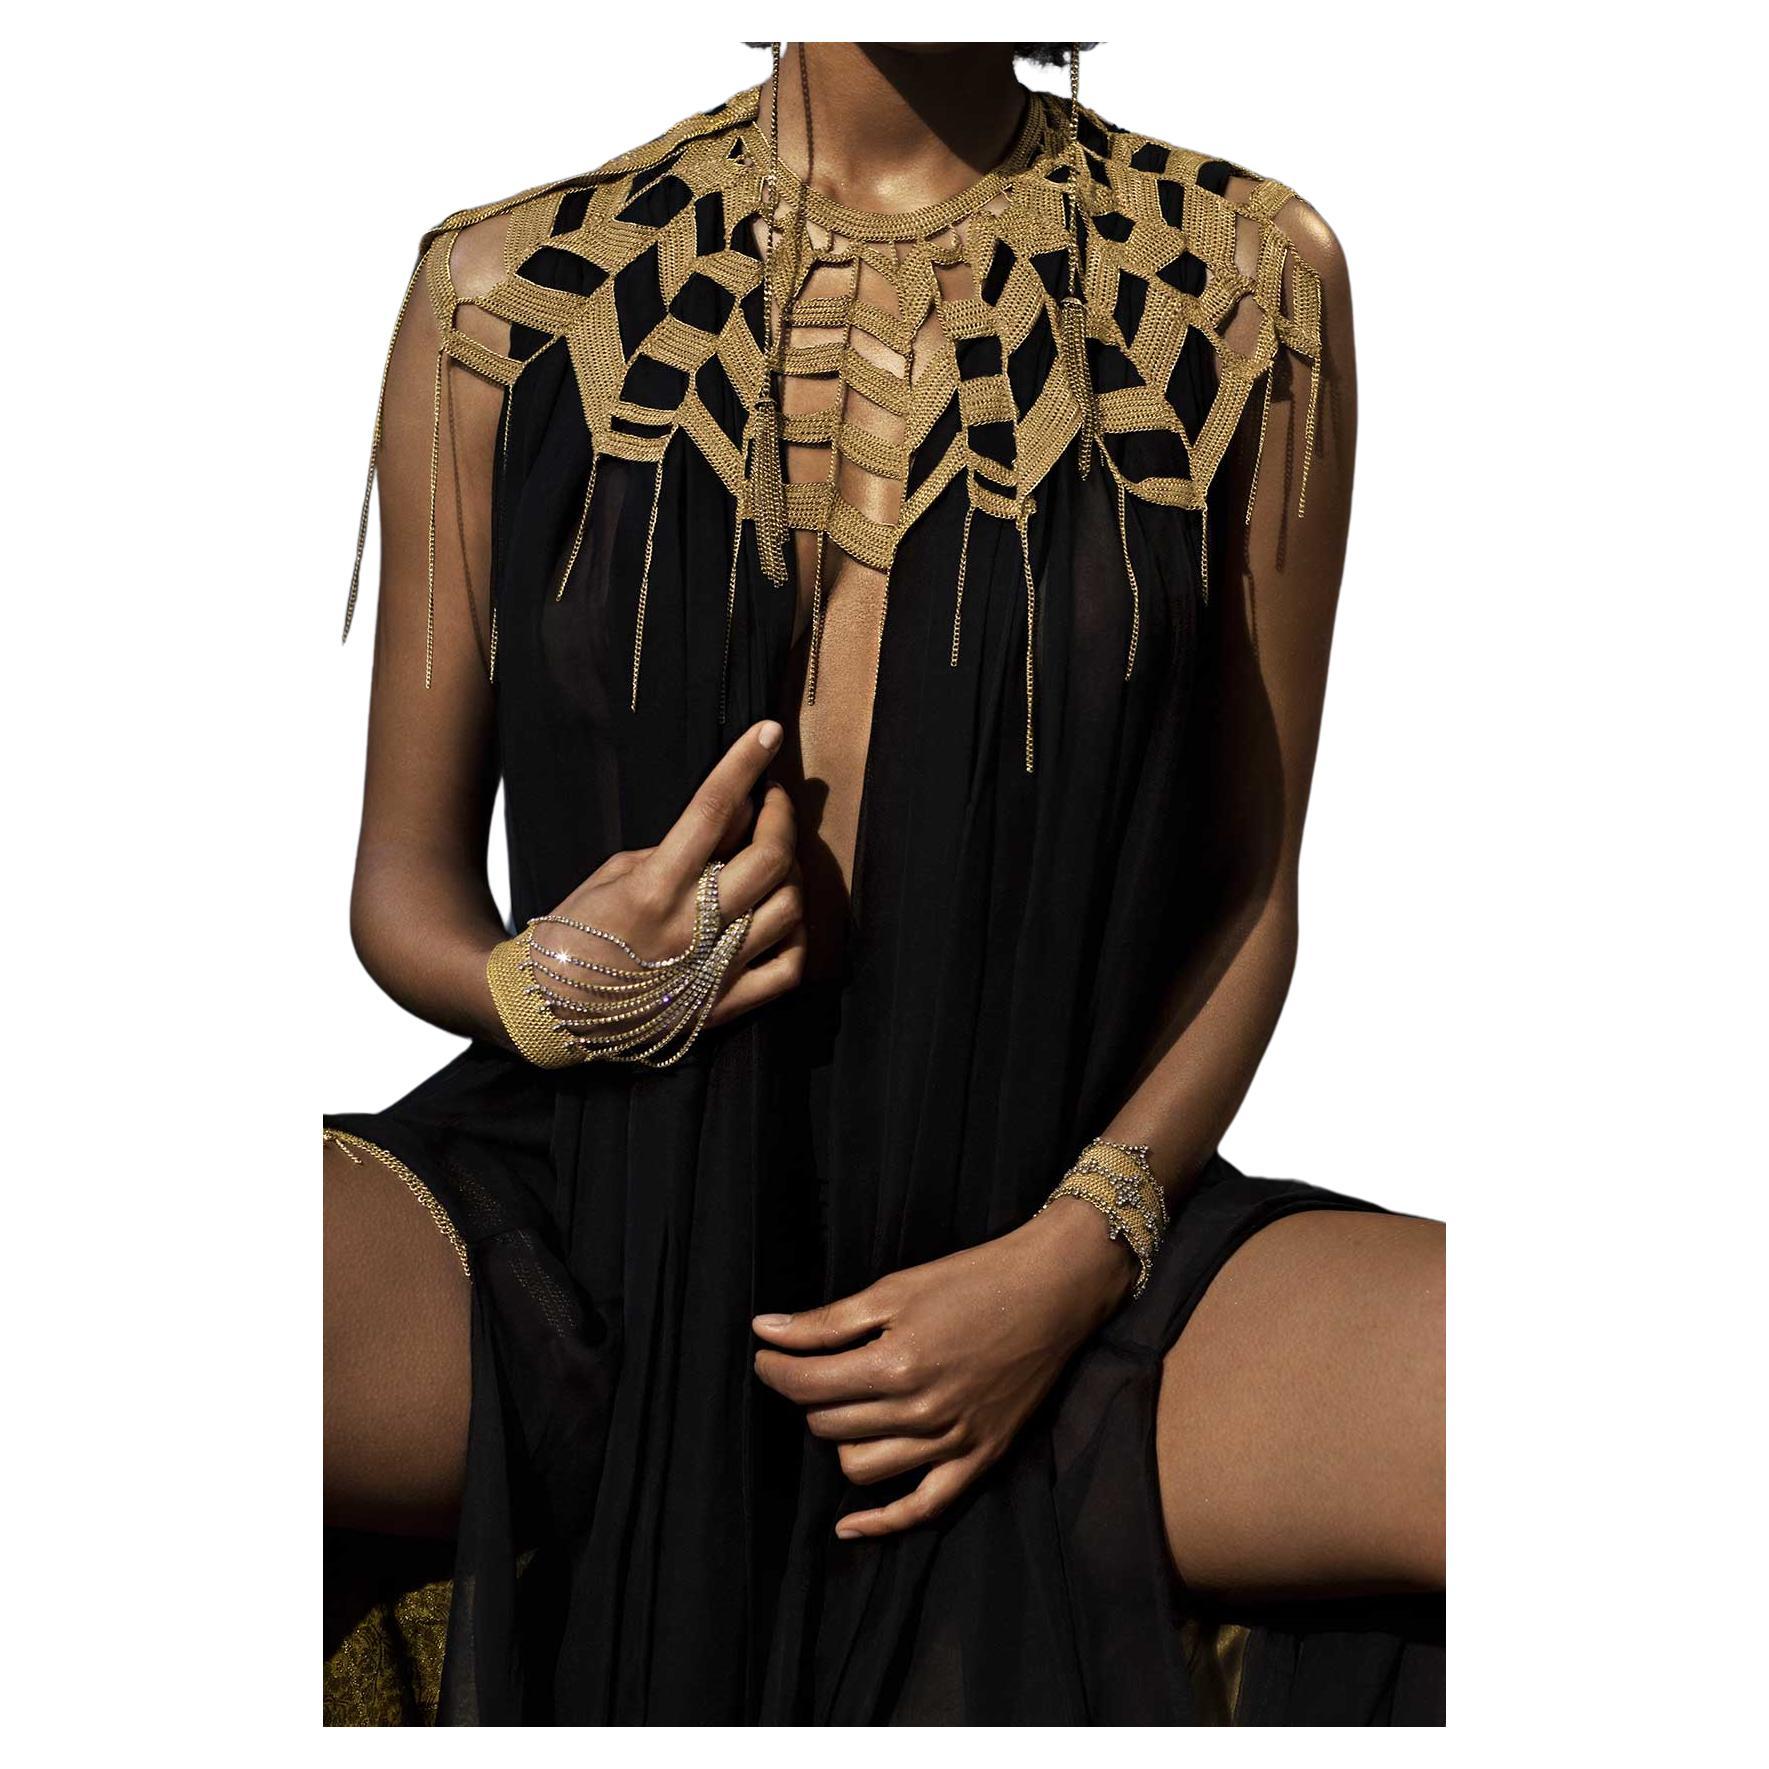 The Chain Lace Cape is hand-sewn with patented technique and the result is a new genre in fashion, a hybrid between clothing and jewellery. We like to call it 